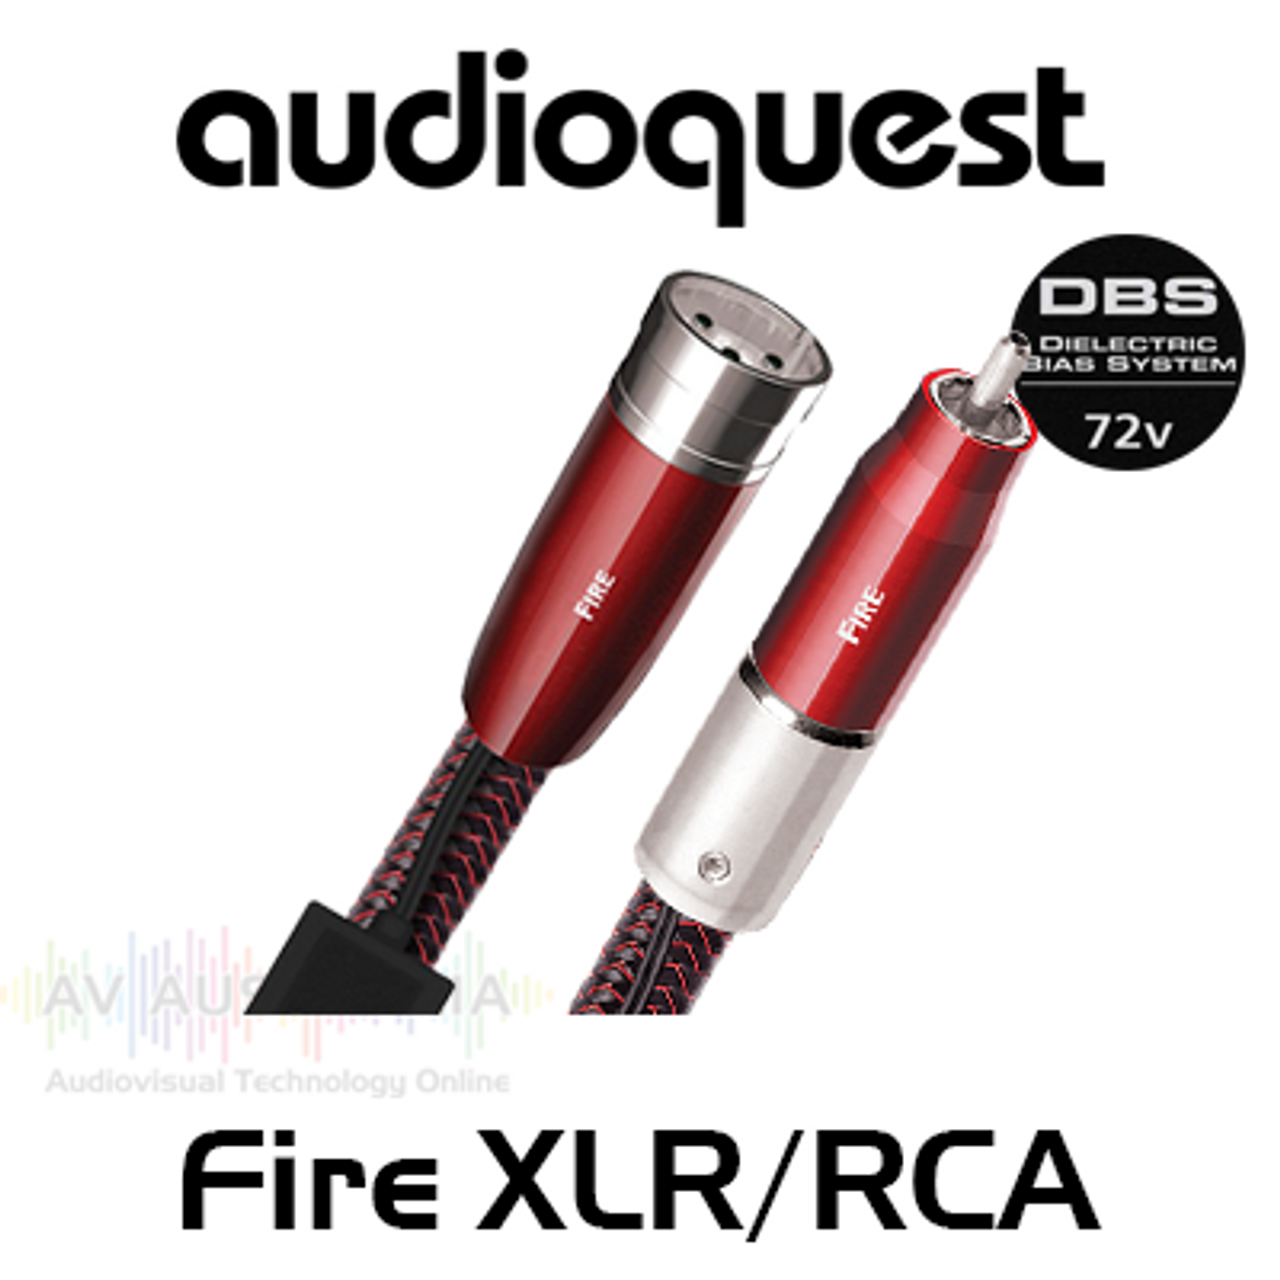 AudioQuest Elements Series Fire XLR / RCA Analog-Audio Interconnects